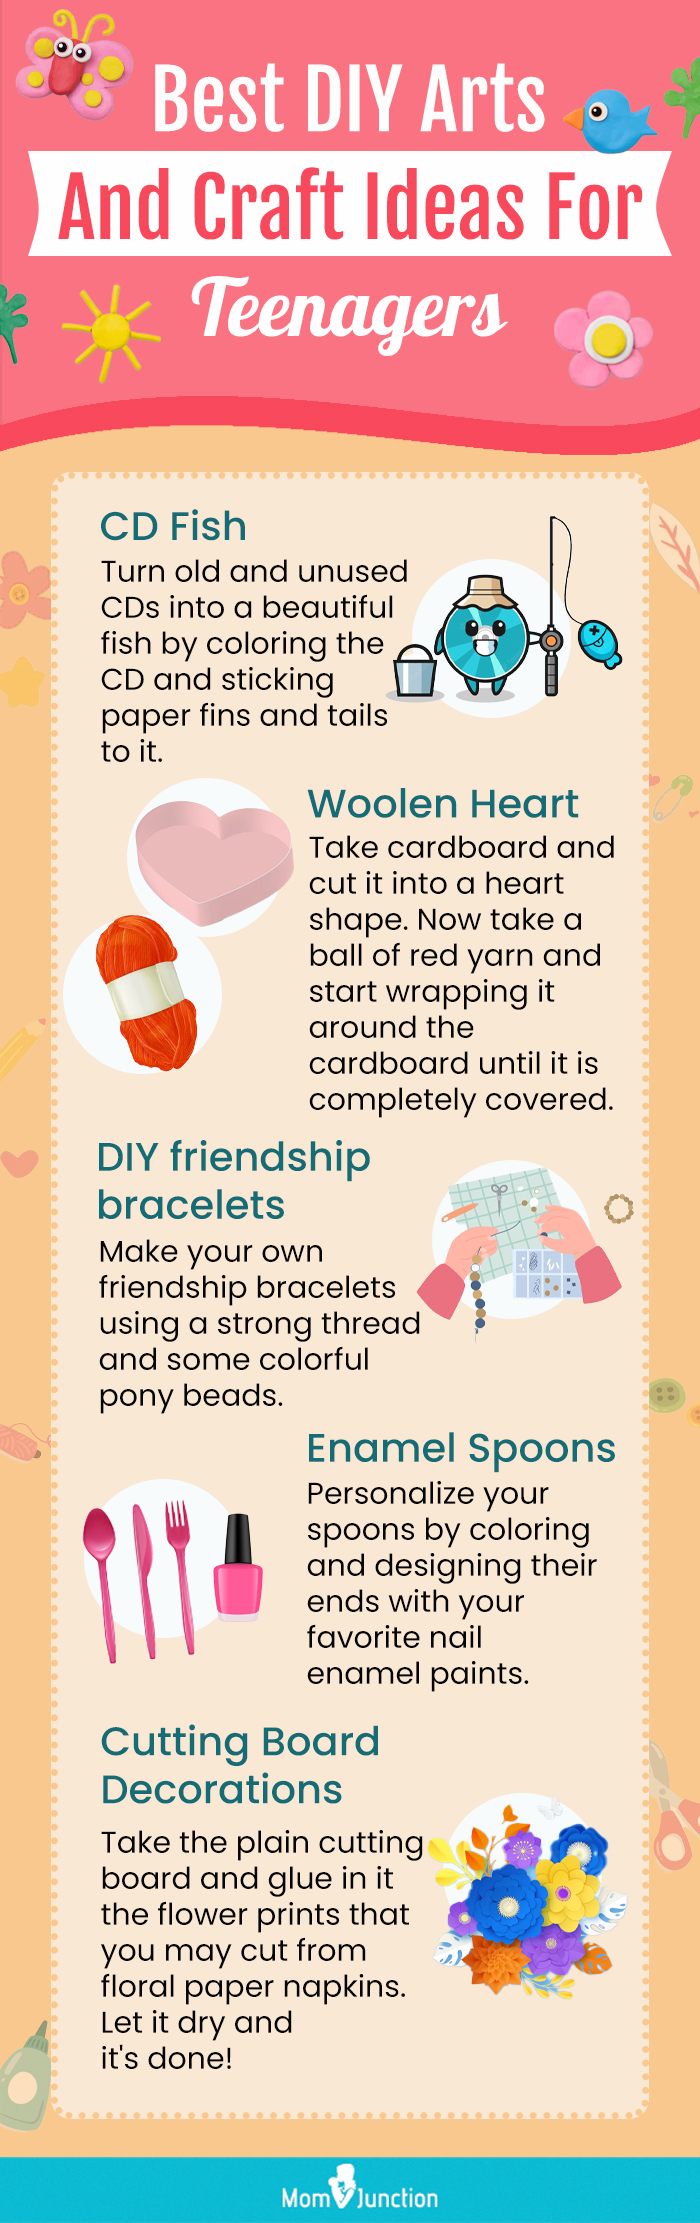 diy arts and craft ideas for teenagers (infographic)